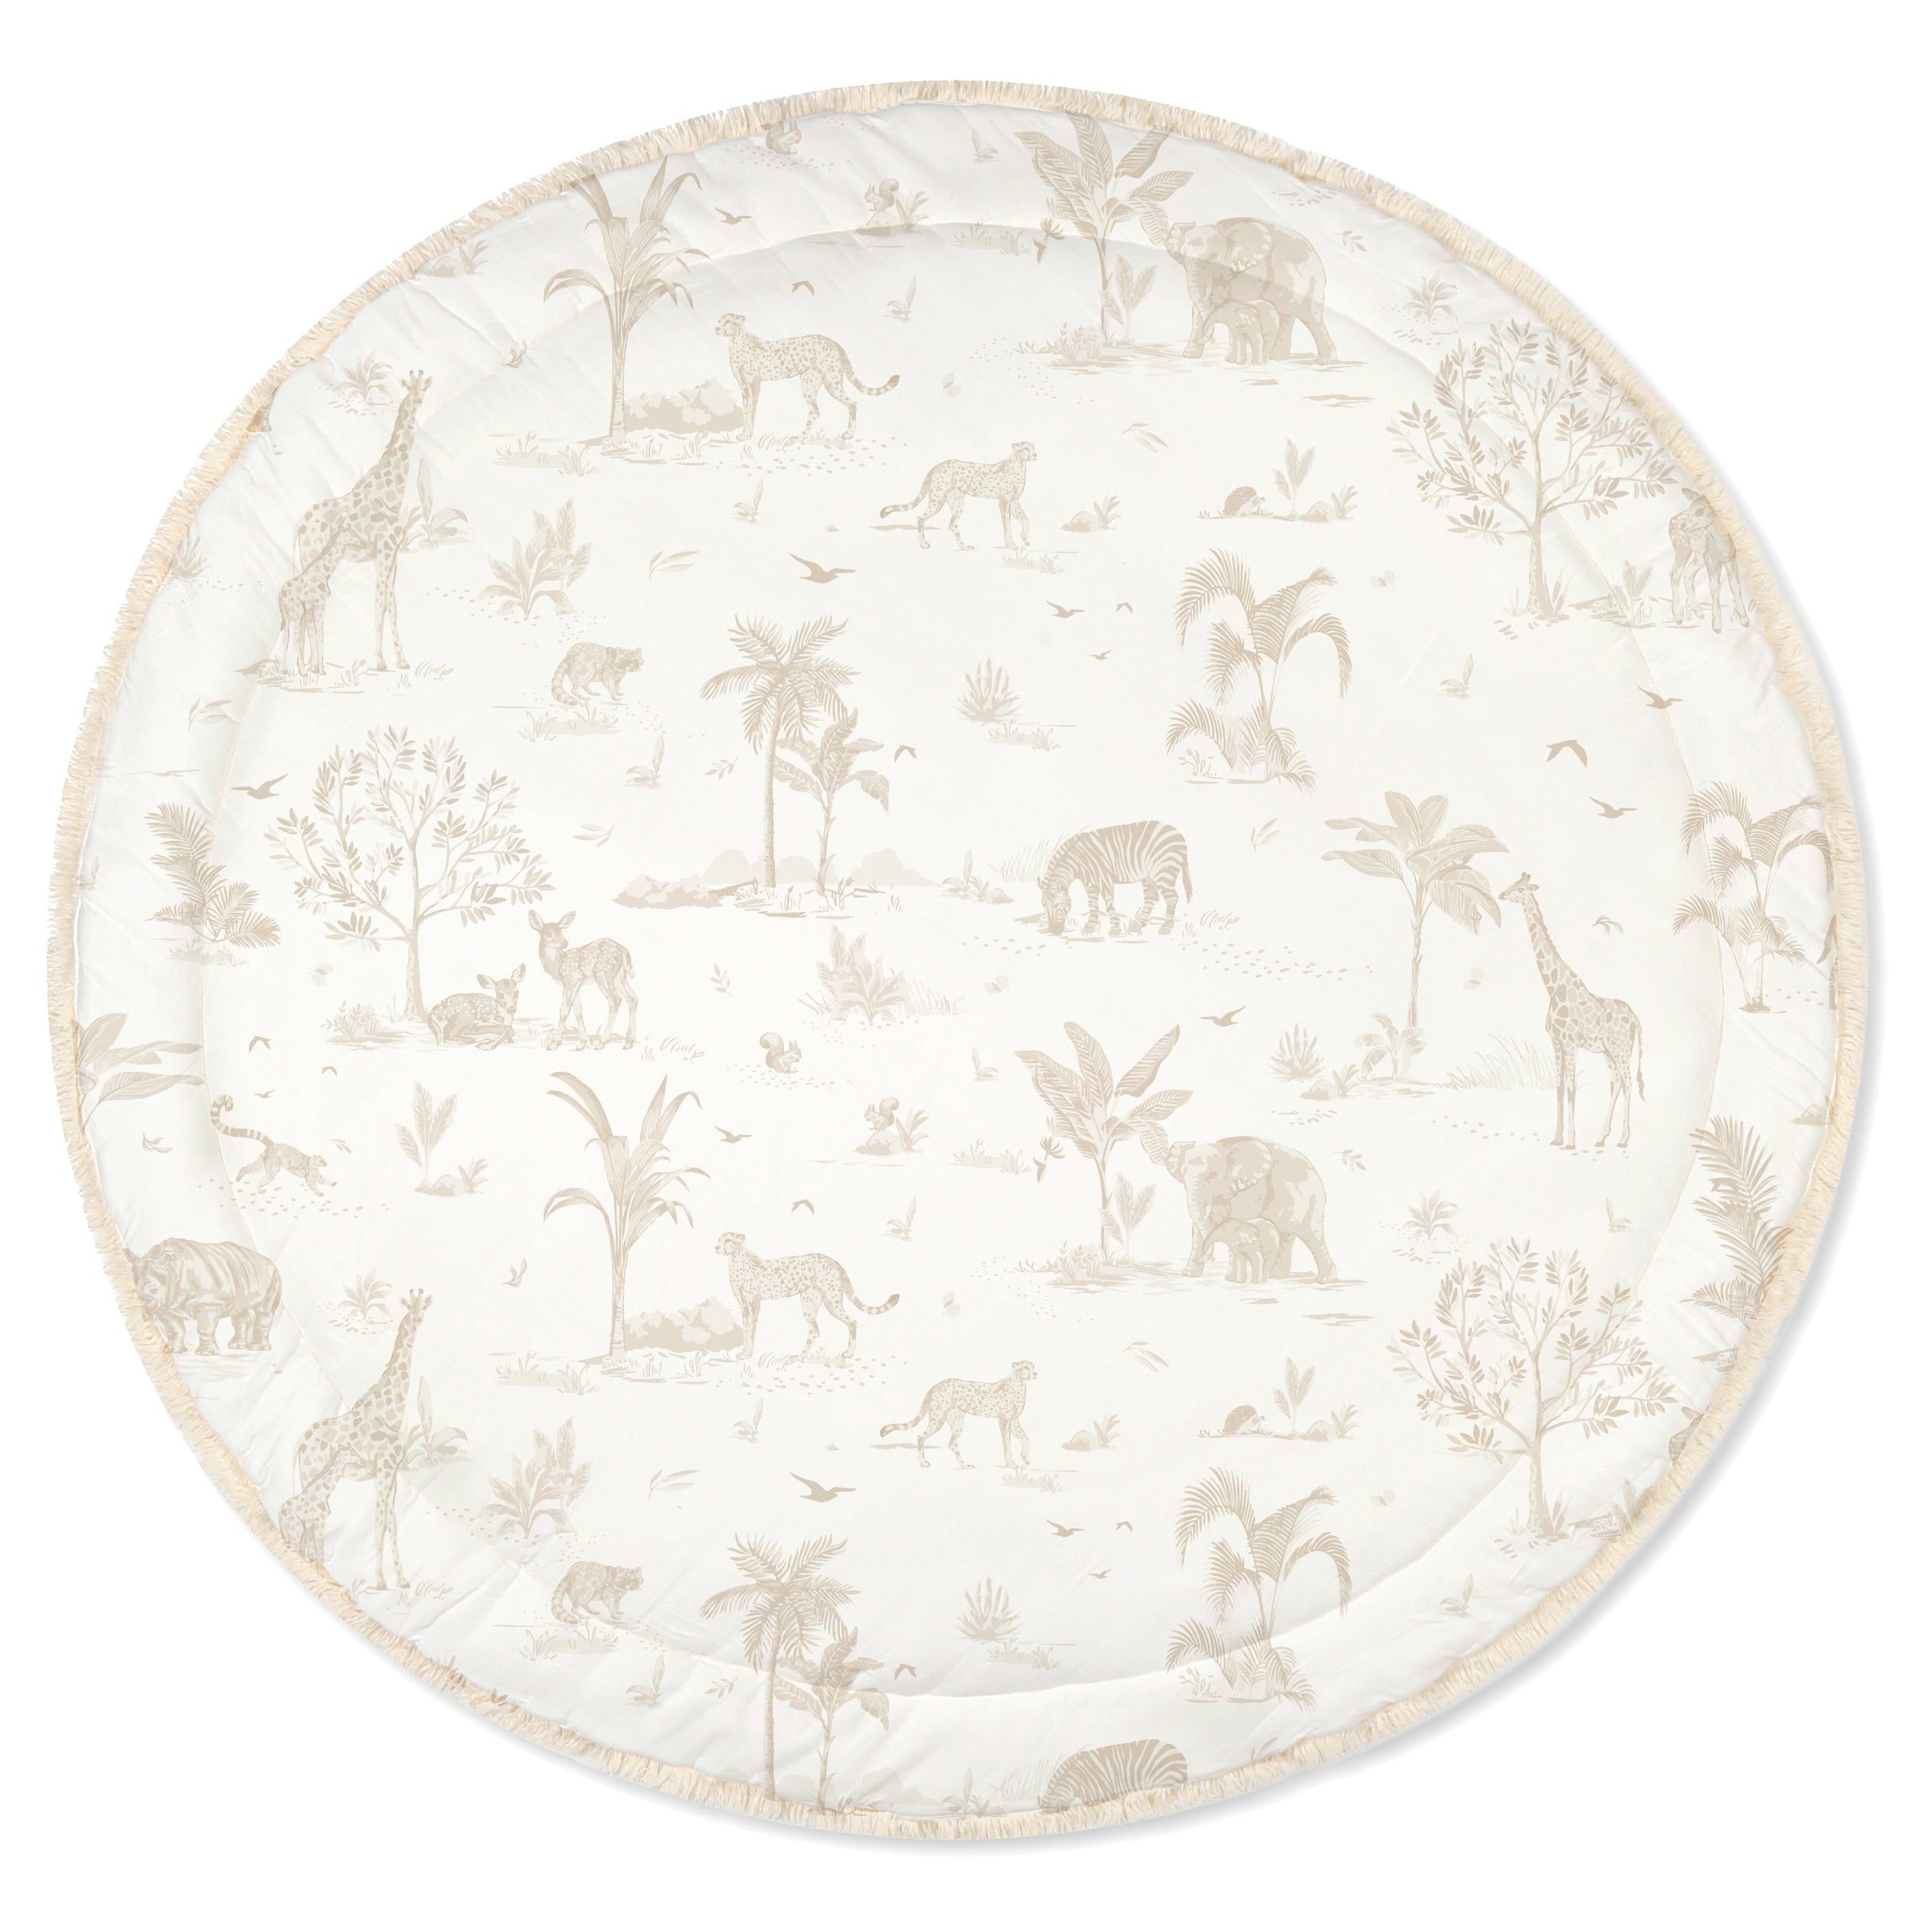 Round Makemake Organics Organic Cotton Quilted Reversible Play Mat featuring a beige and white safari theme with illustrations of giraffes, elephants, lions, trees, and other flora.